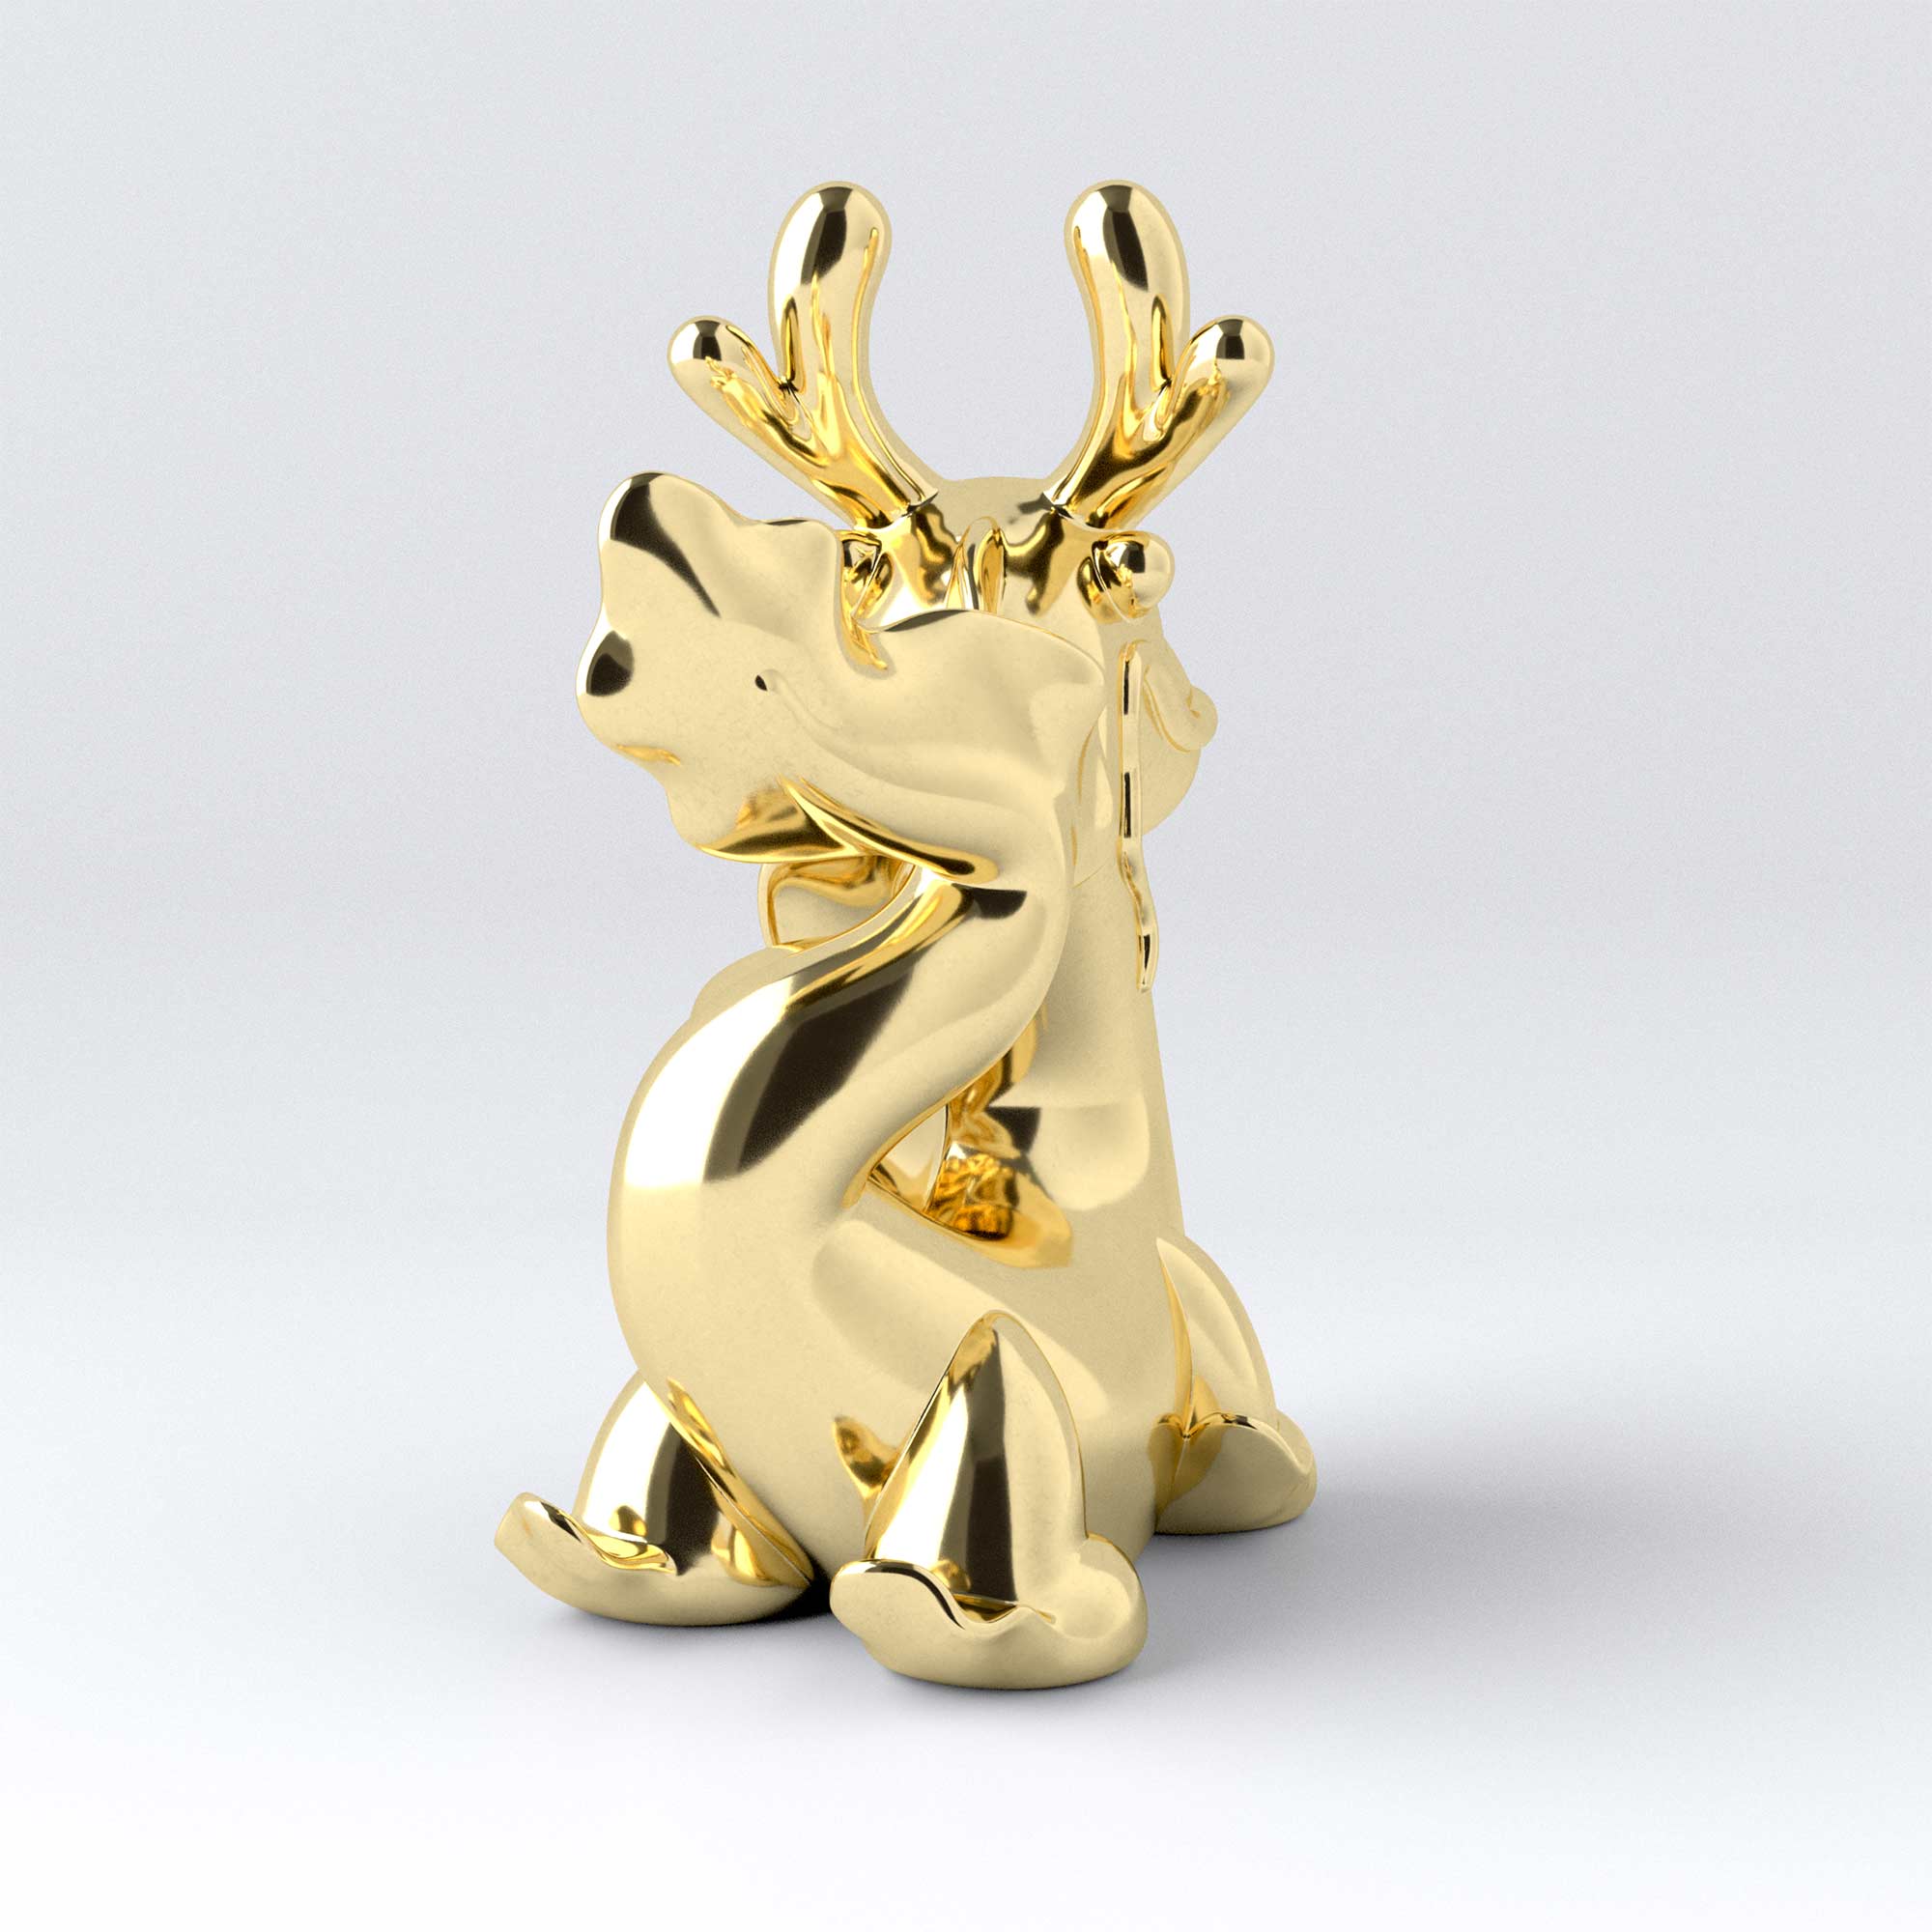 Dragon's Breath stainless steel with gold finish sculpture, limited edition. Back view